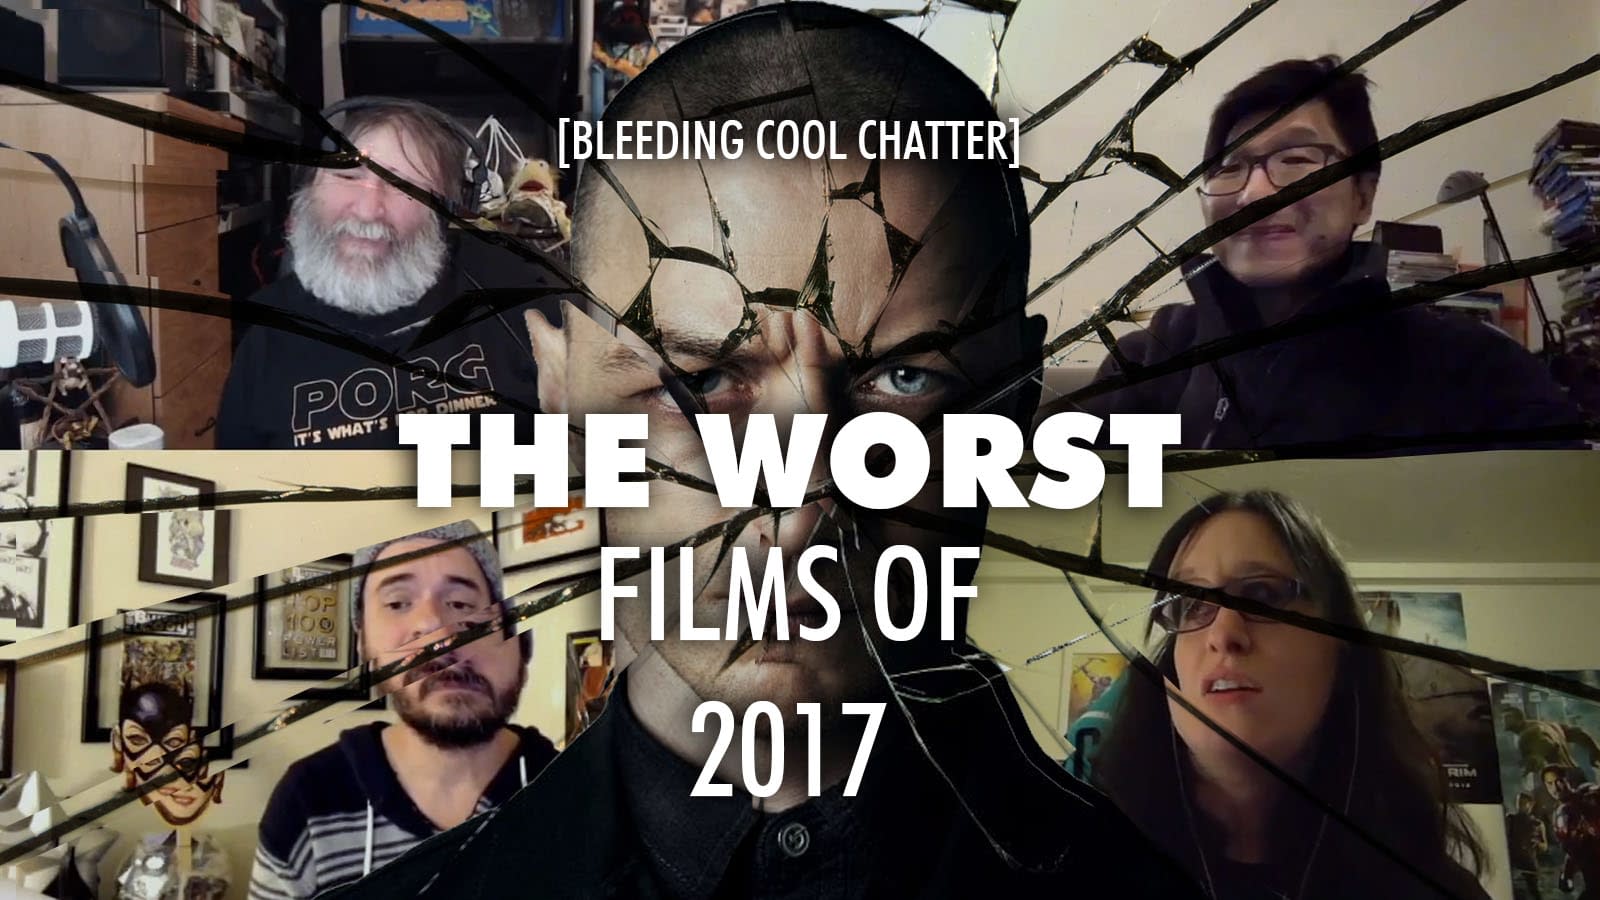 Bleeding Cool Chatter #14: The Worst Films of 2017